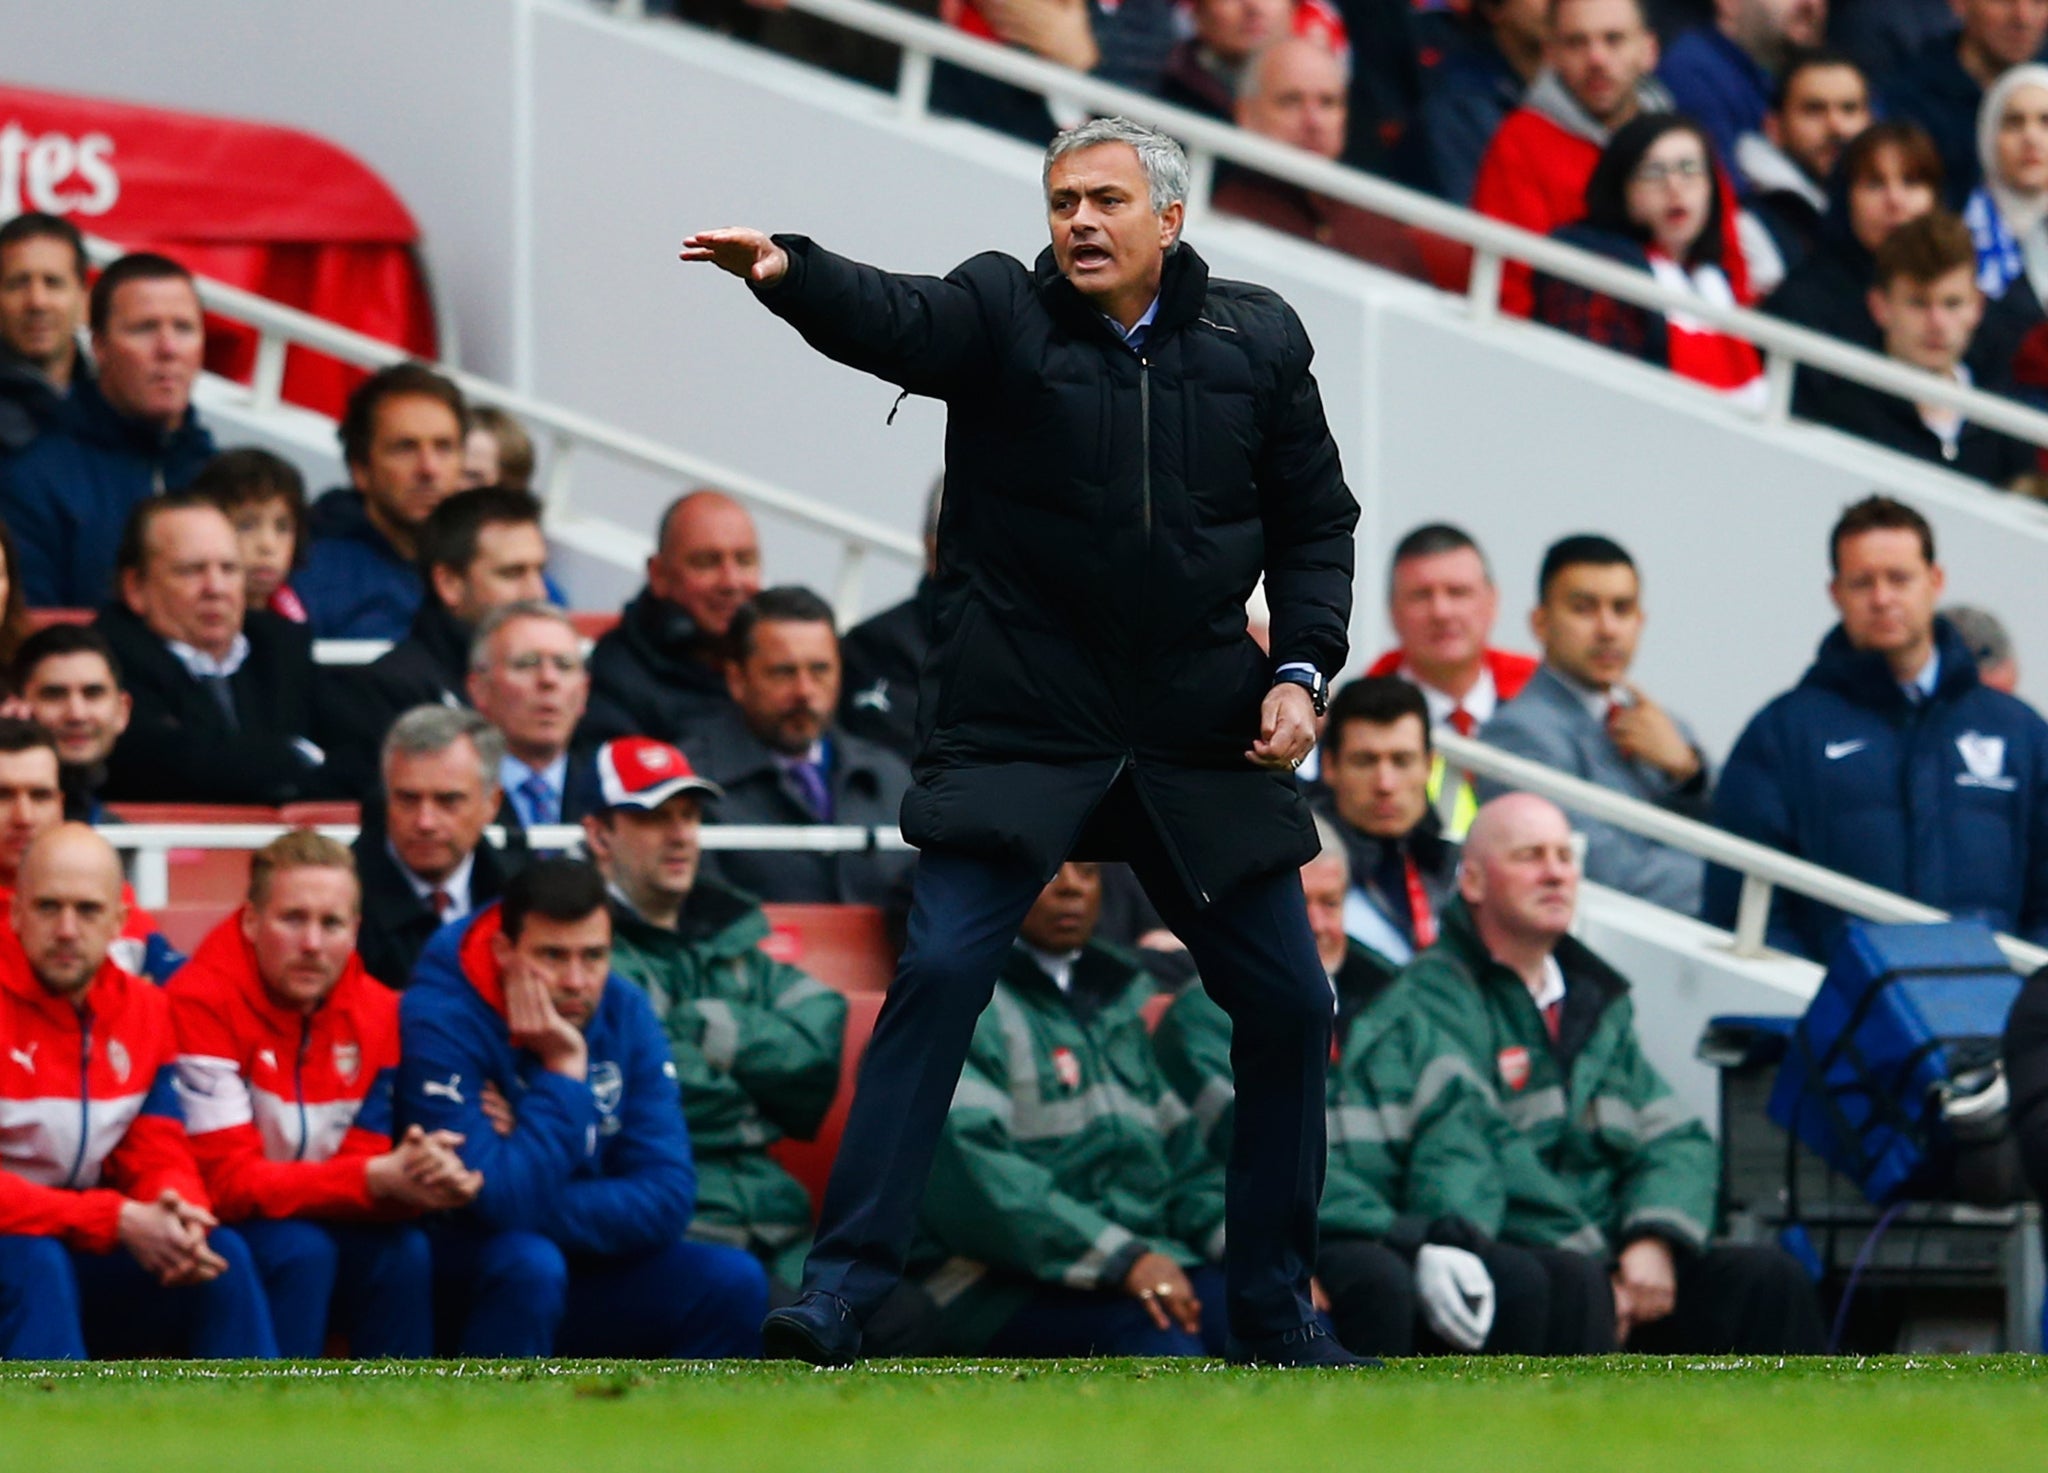 Jose Mourinho was vocal on the sidelines